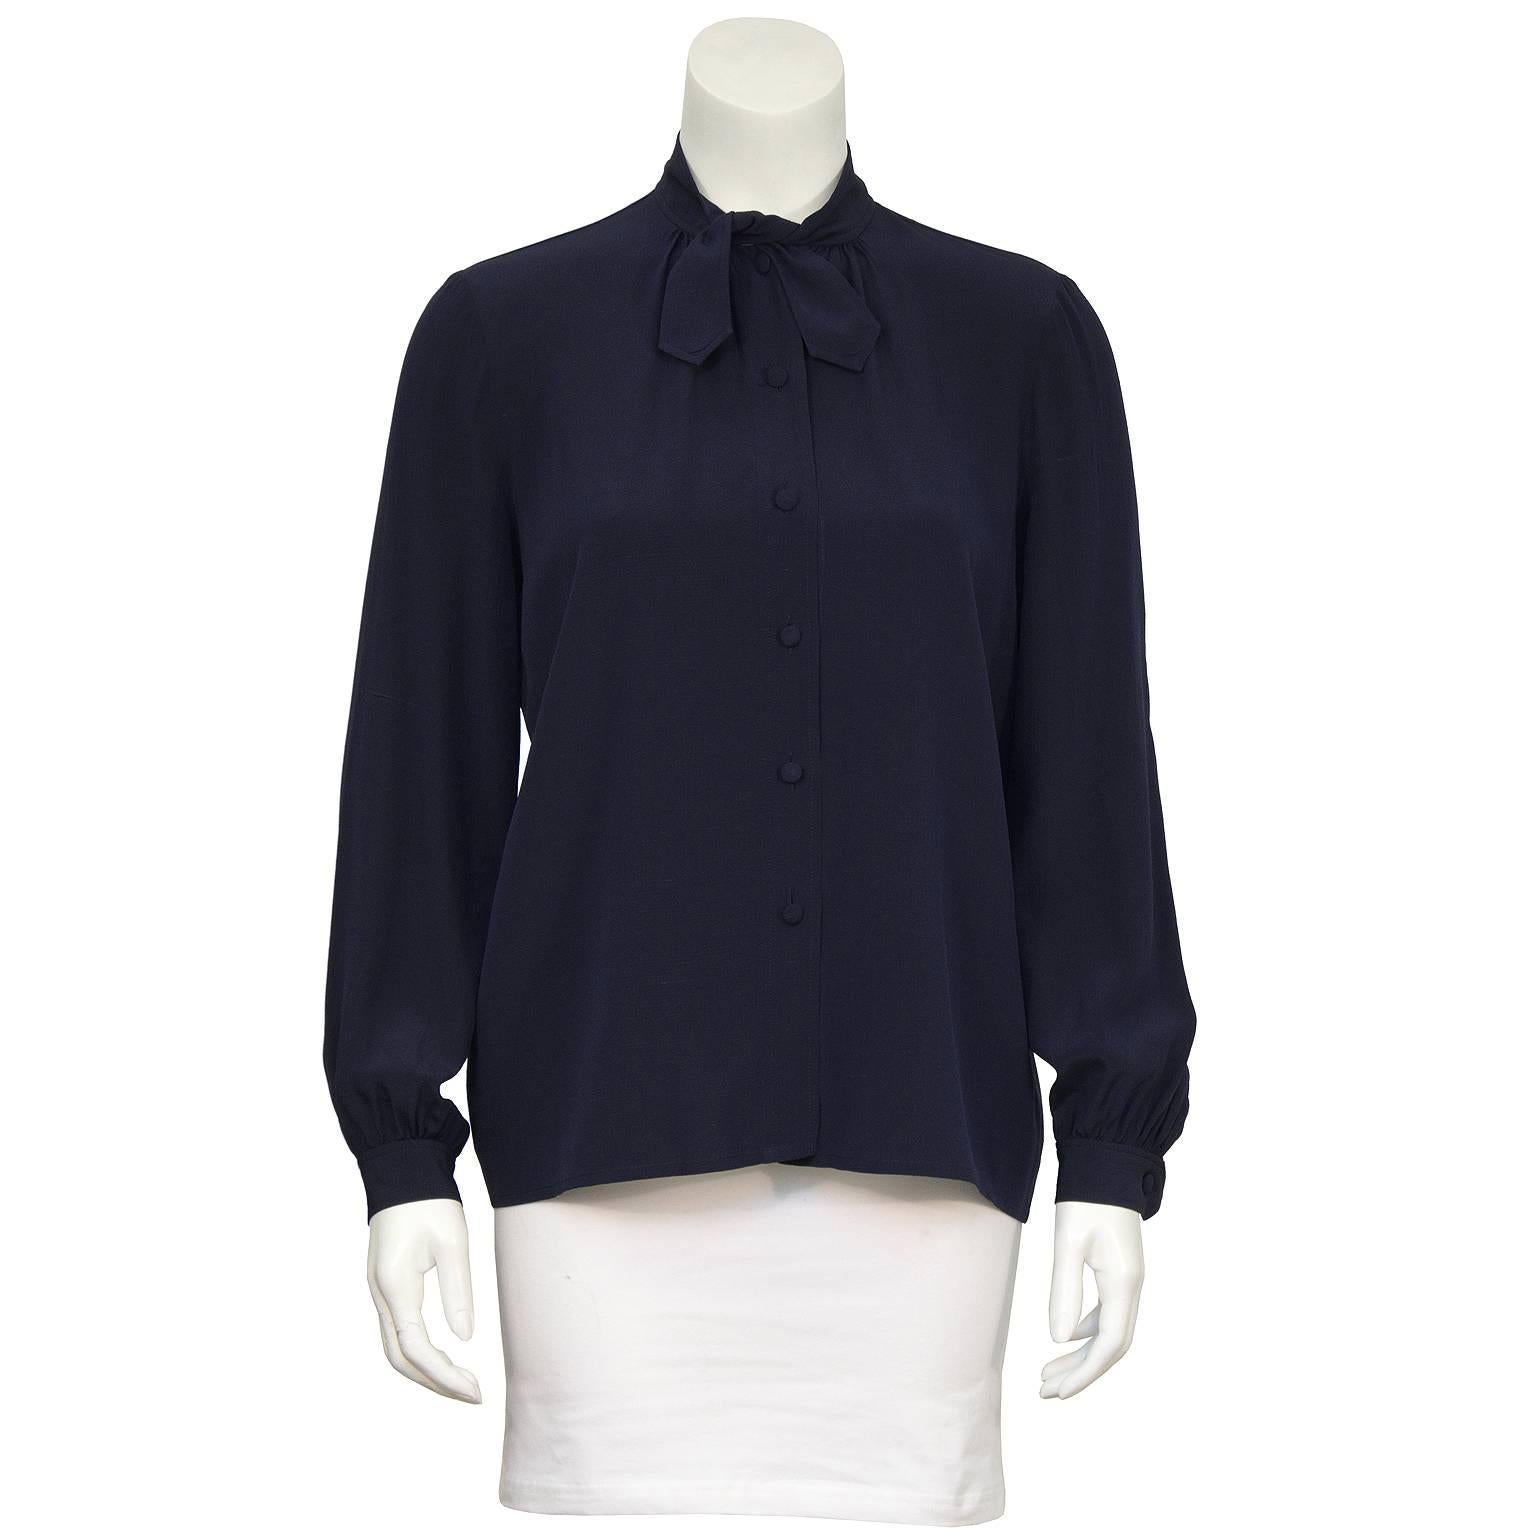 1970’s navy silk blouse labeled Chanel Creations. The blouse has a short tie at the neck and buttons up the front with matching fabric covered buttons. The sleeves have a slight puff at the buttoned cuff. In excellent condition, fits like a US 4. 
